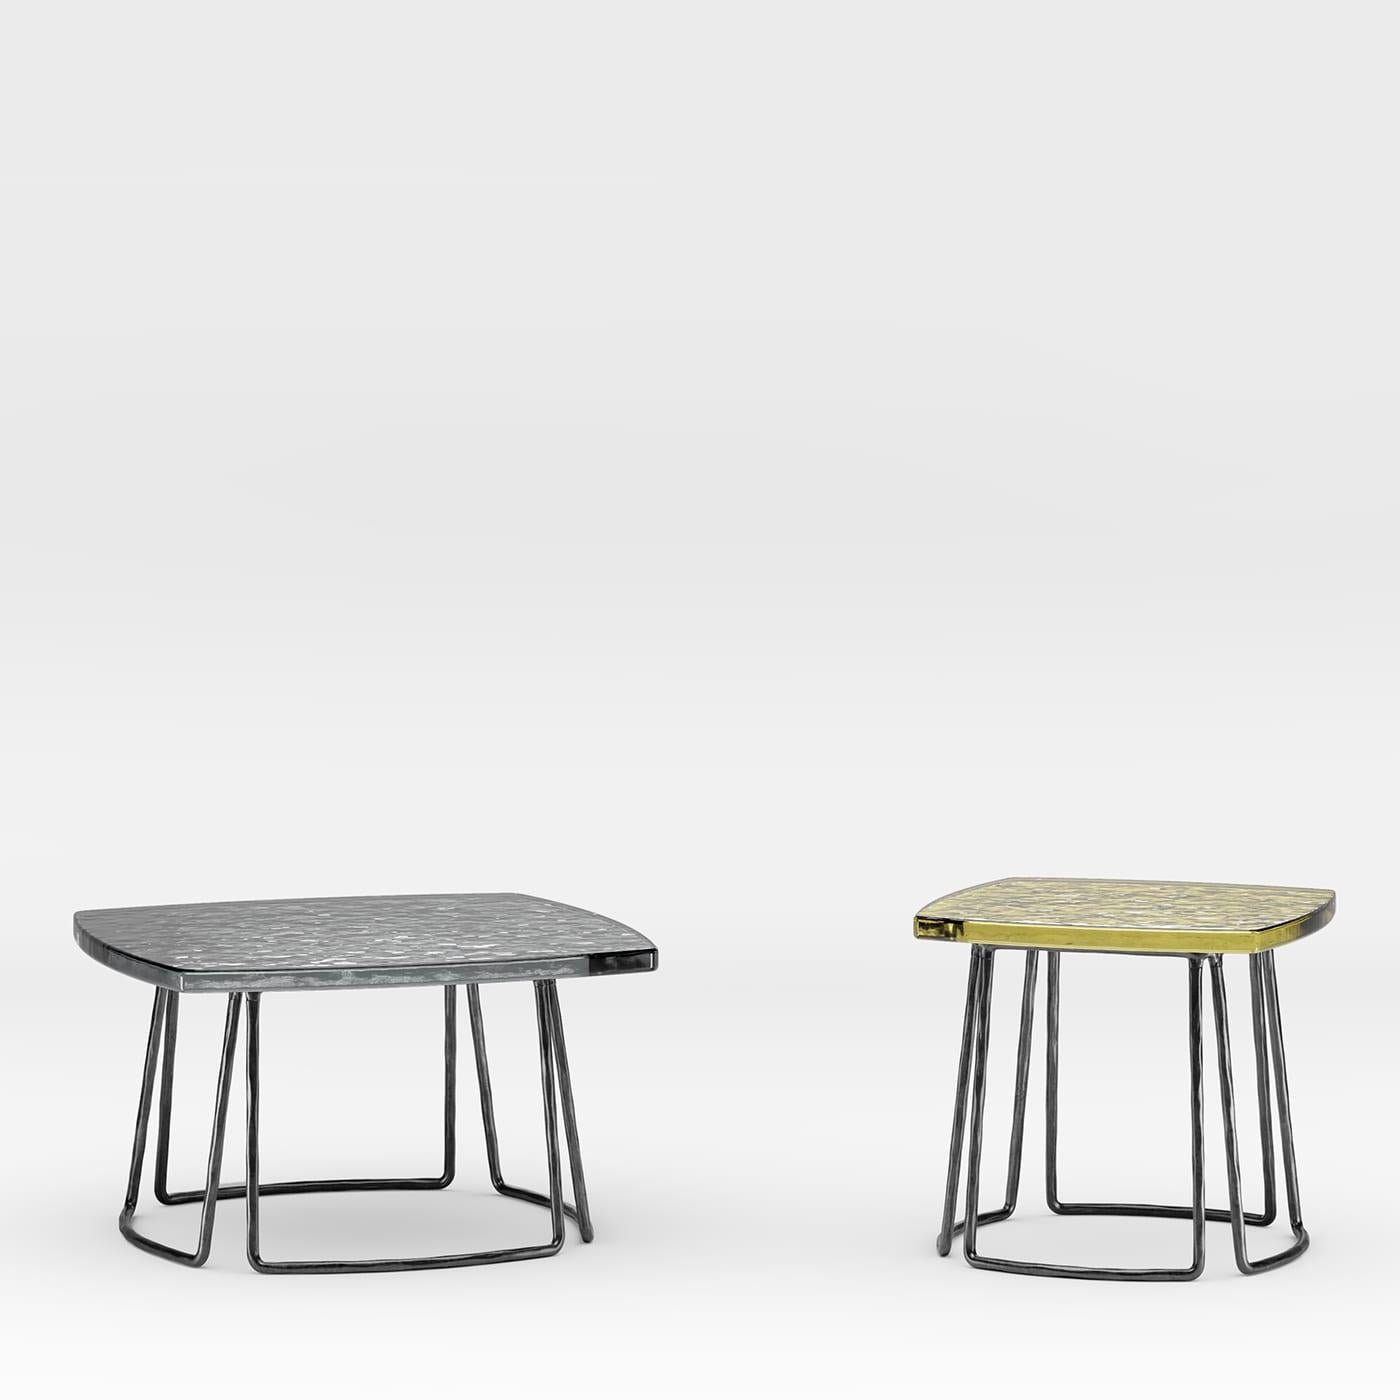 Designed by Stormo Studio for the superior crafting techniques of Dante Negro metalworkers, this side table combines a raw, handmade character with timeless sophistication. An elegant accent to an outdoor patio, it is made of stainless steel,